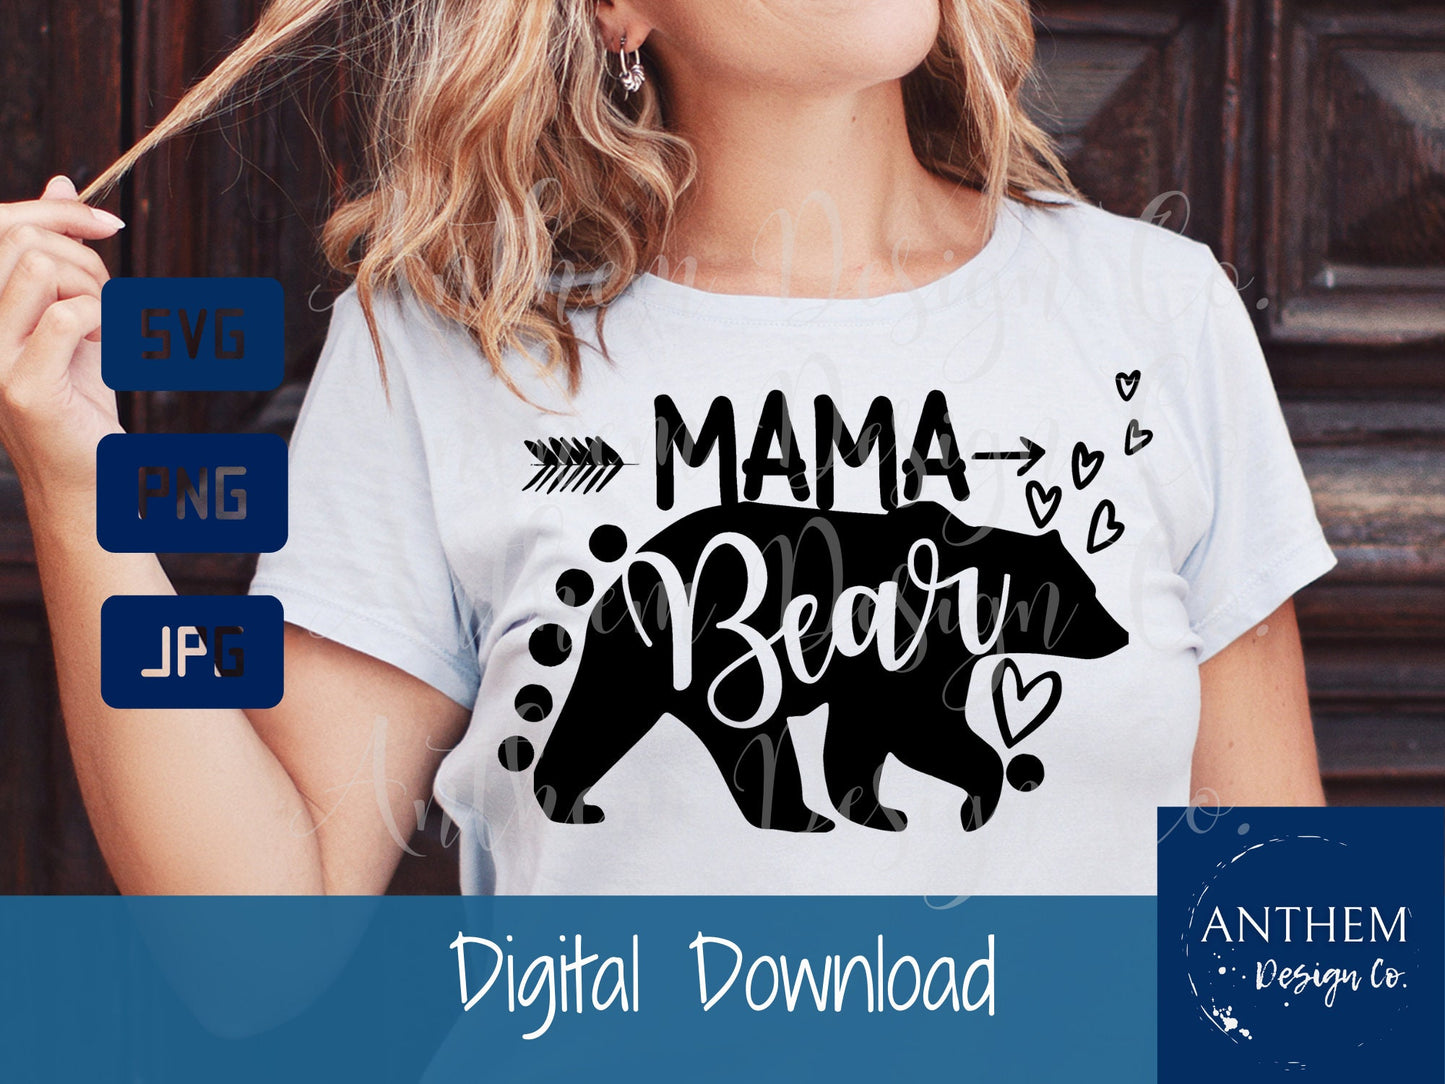 Mama Bear SVG, Mommy SVG, Mom To Be svg, Mom Shirt Design, Bear Mama svg, Mom svg Sayings, Mothers Day svg, Cricut & Silhouette cut files